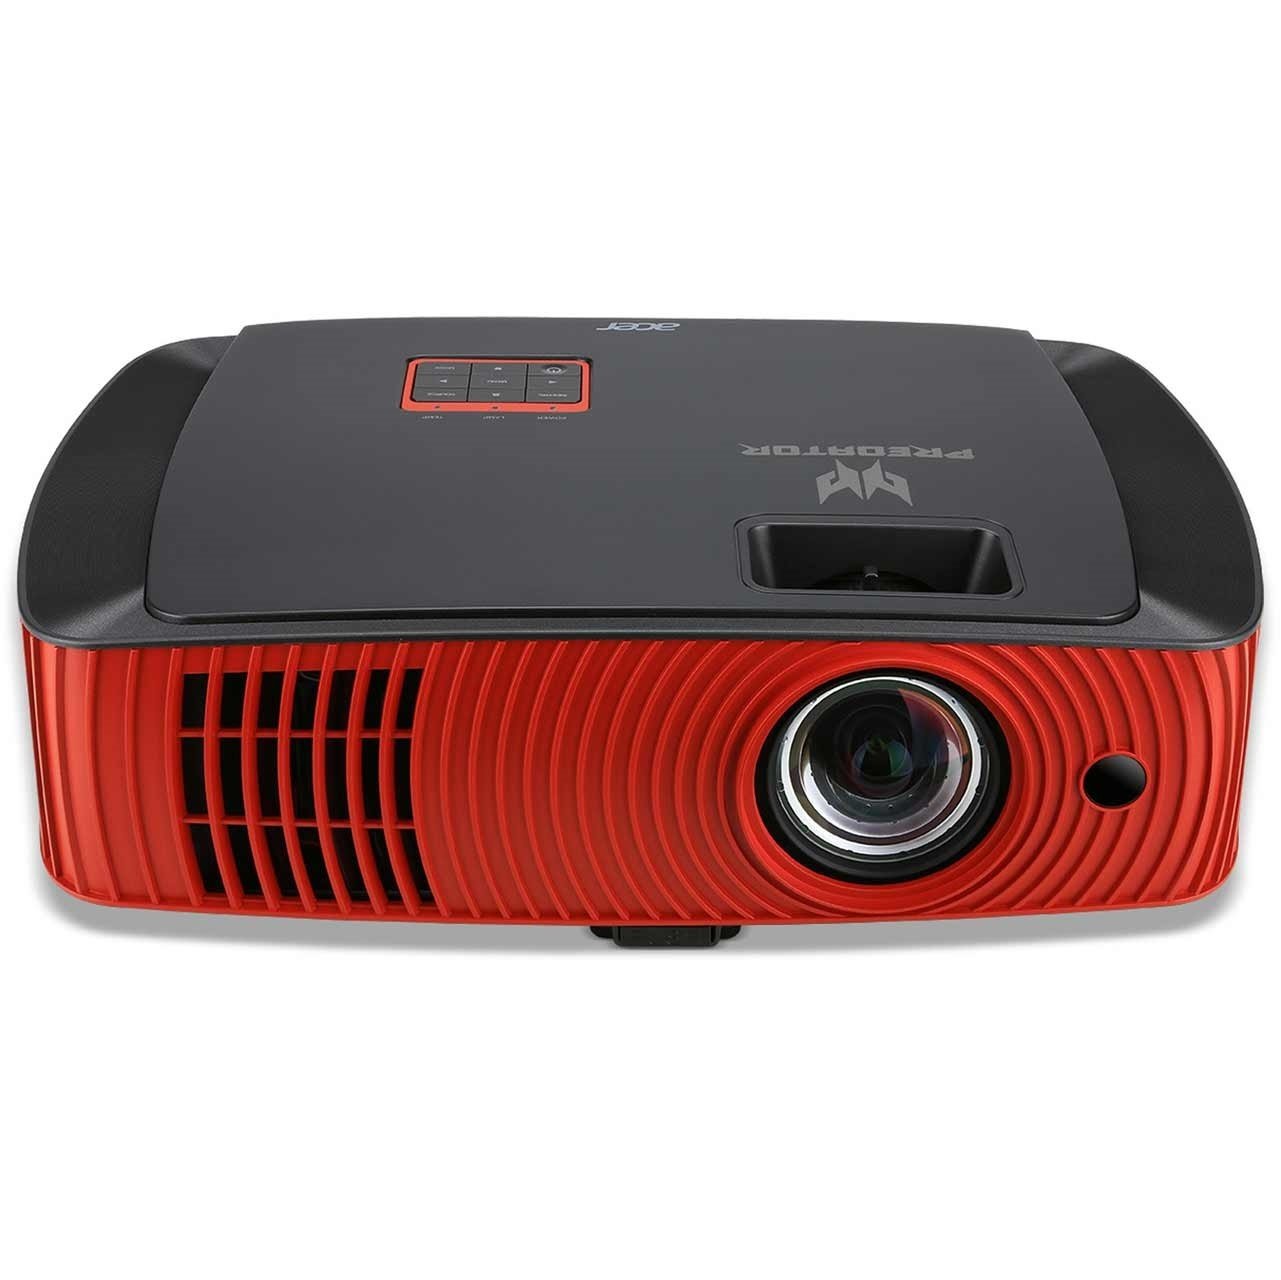 Acer Predator Z650 FHD Gaming Projector Review